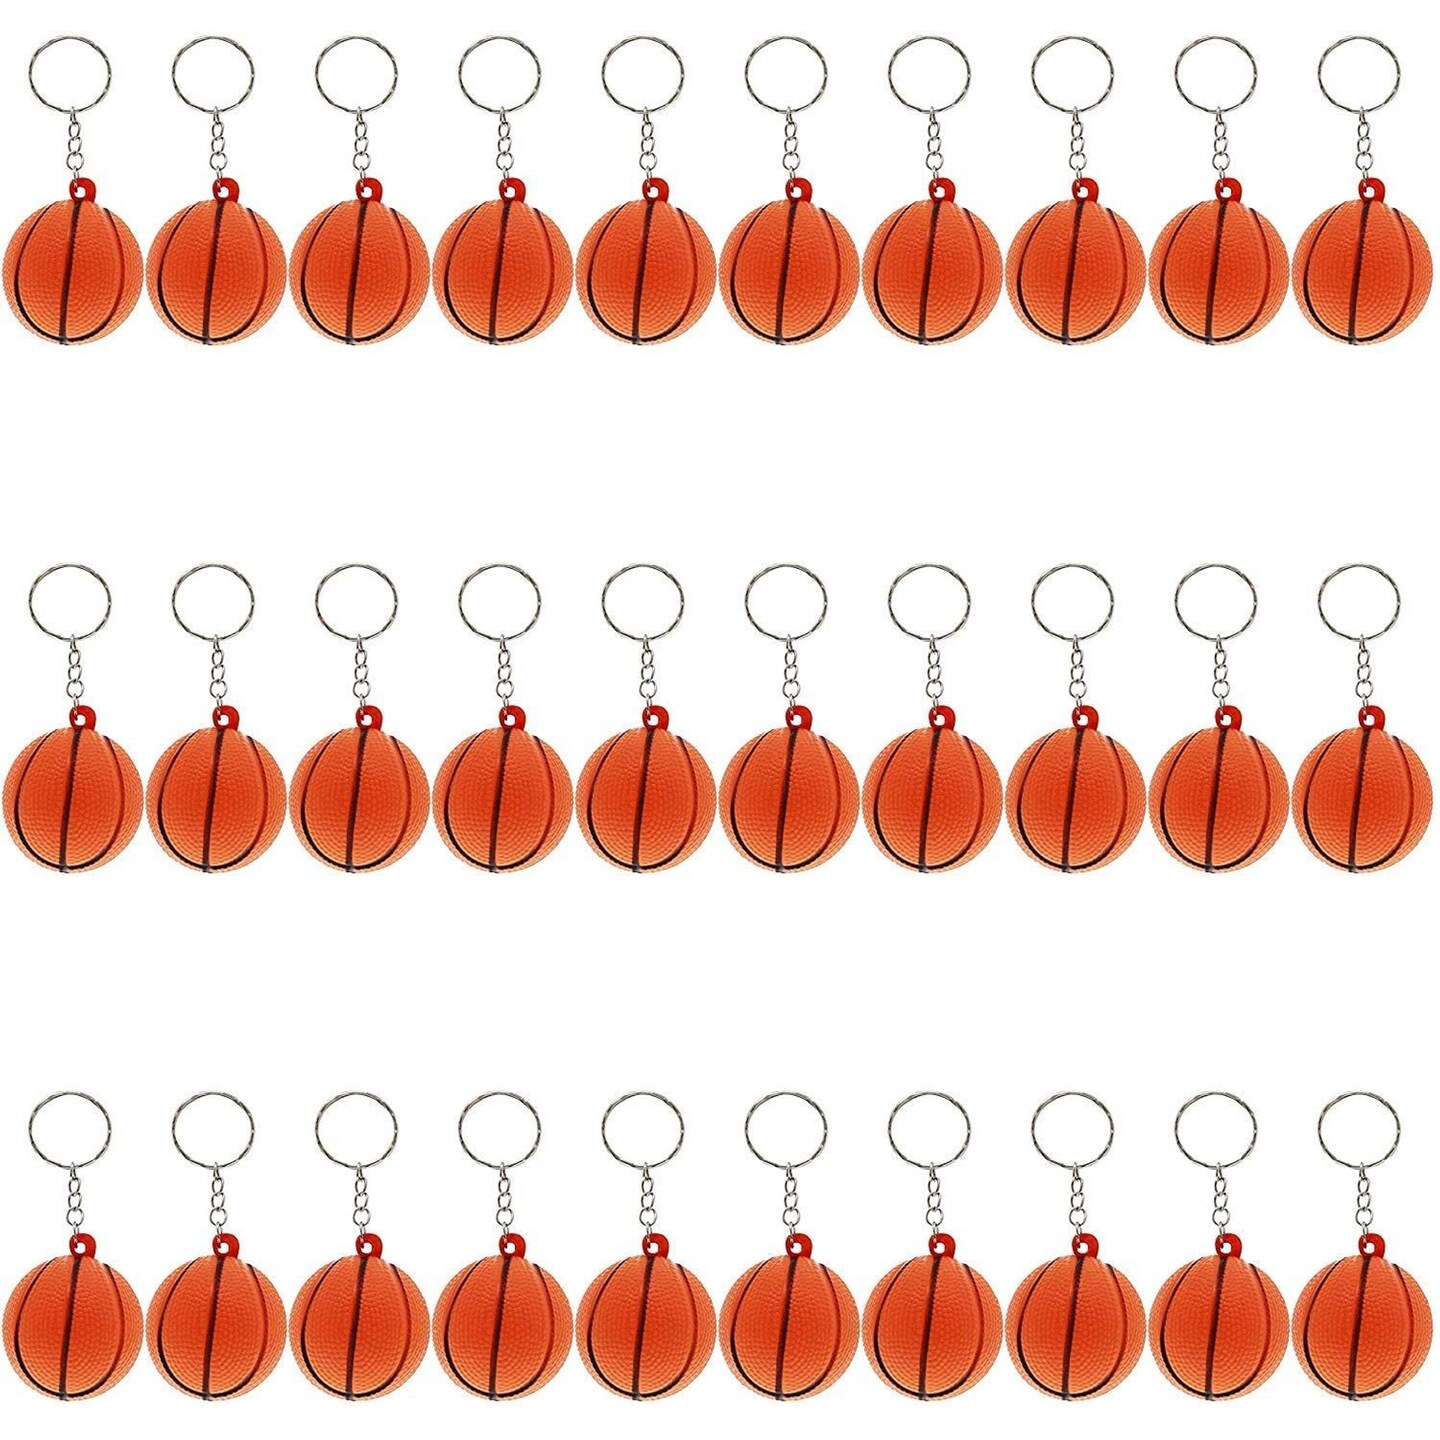 20 PACK BASKETBALL Ball Keychains for Party Favors,Basketball